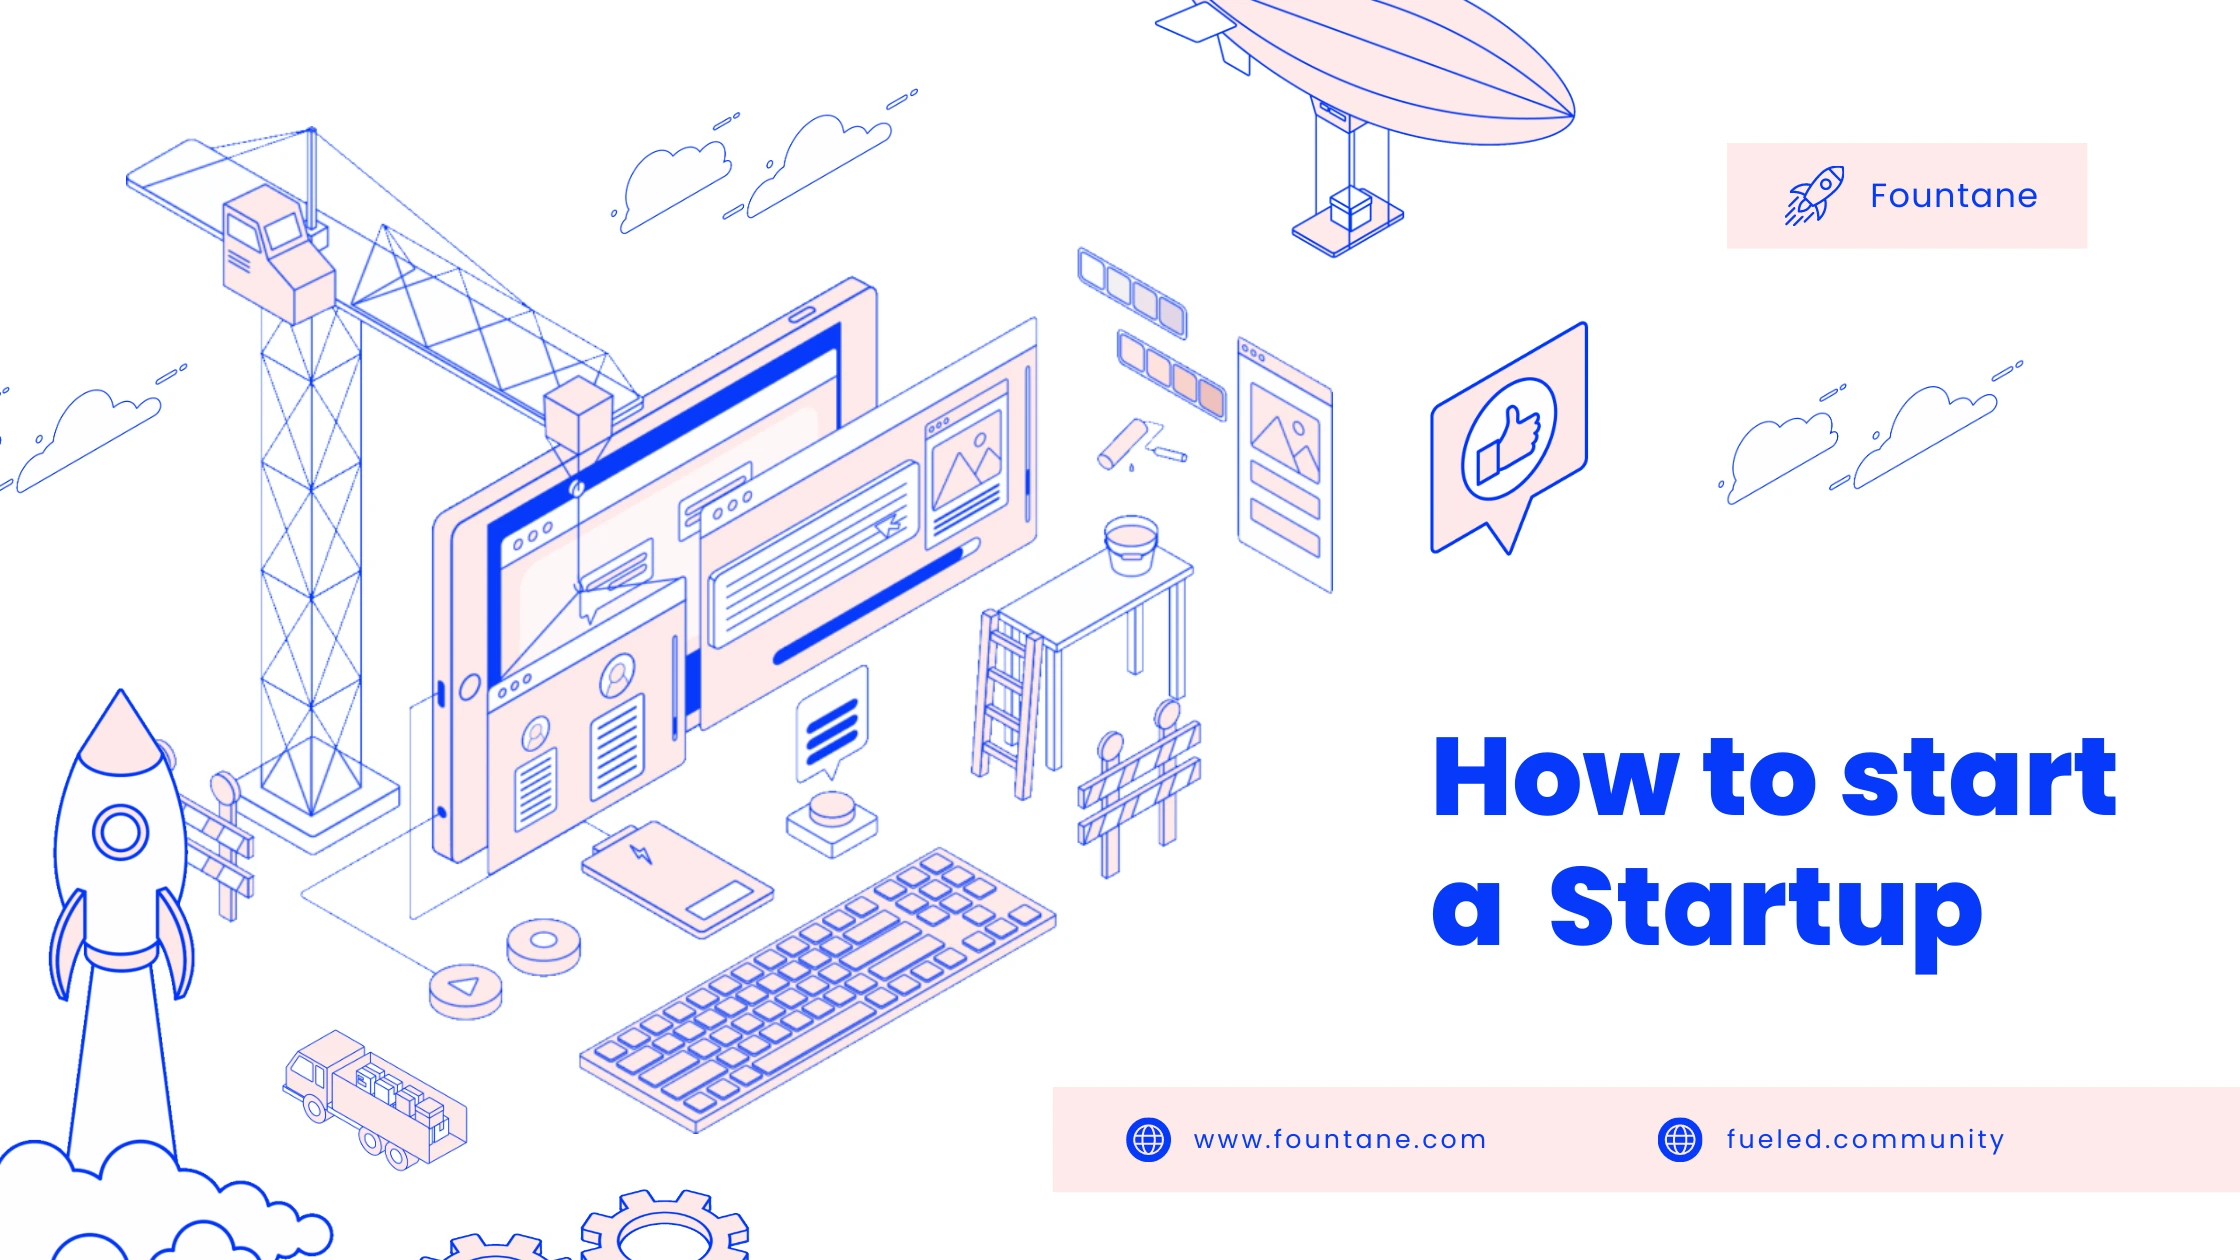 What does it take to start a Startup